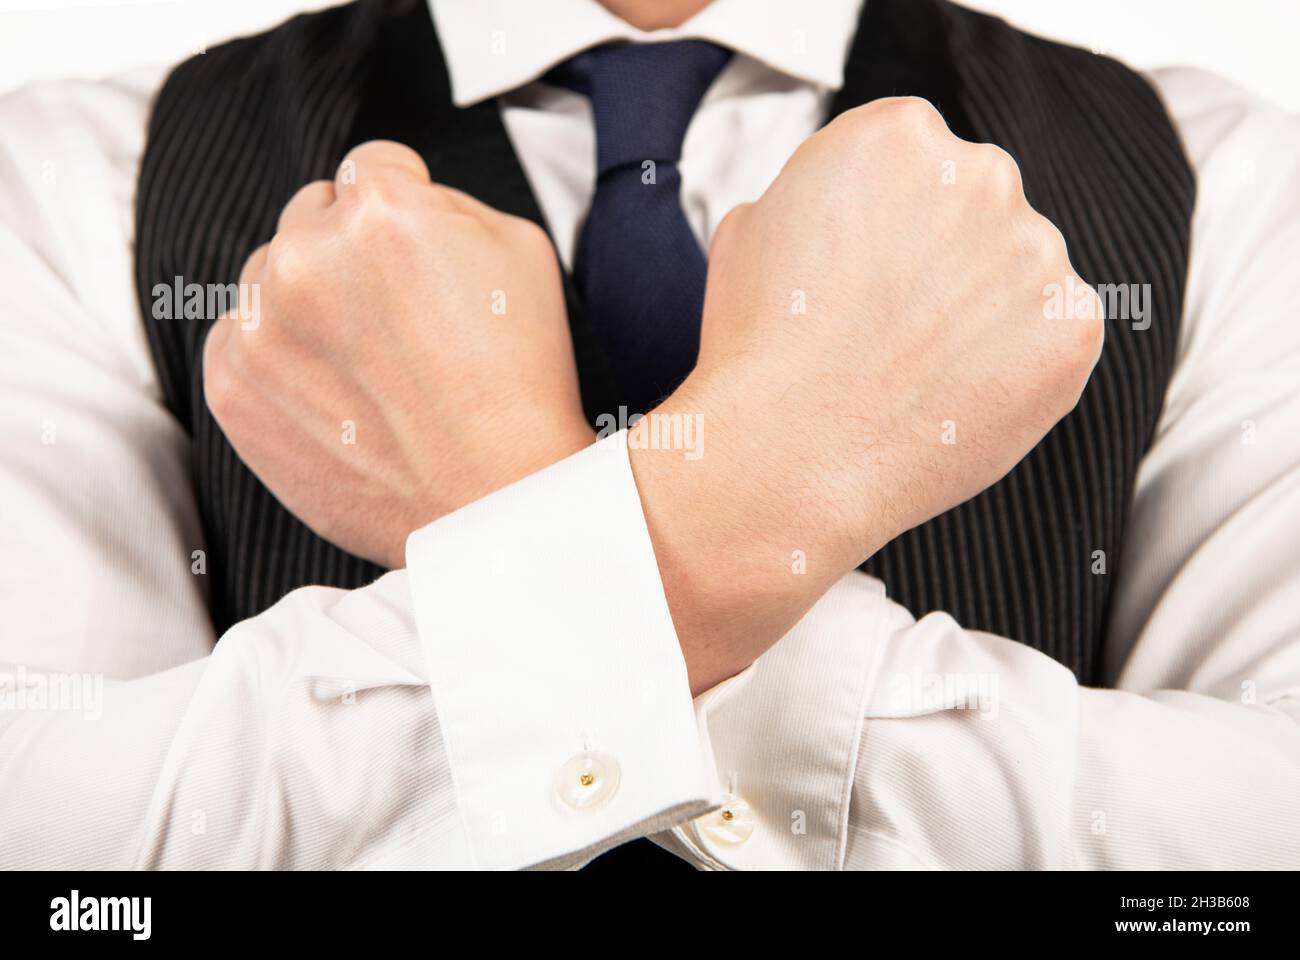 man with crossed arms. male confidence. mens beauty. guy holding fists defending himself Stock Photo